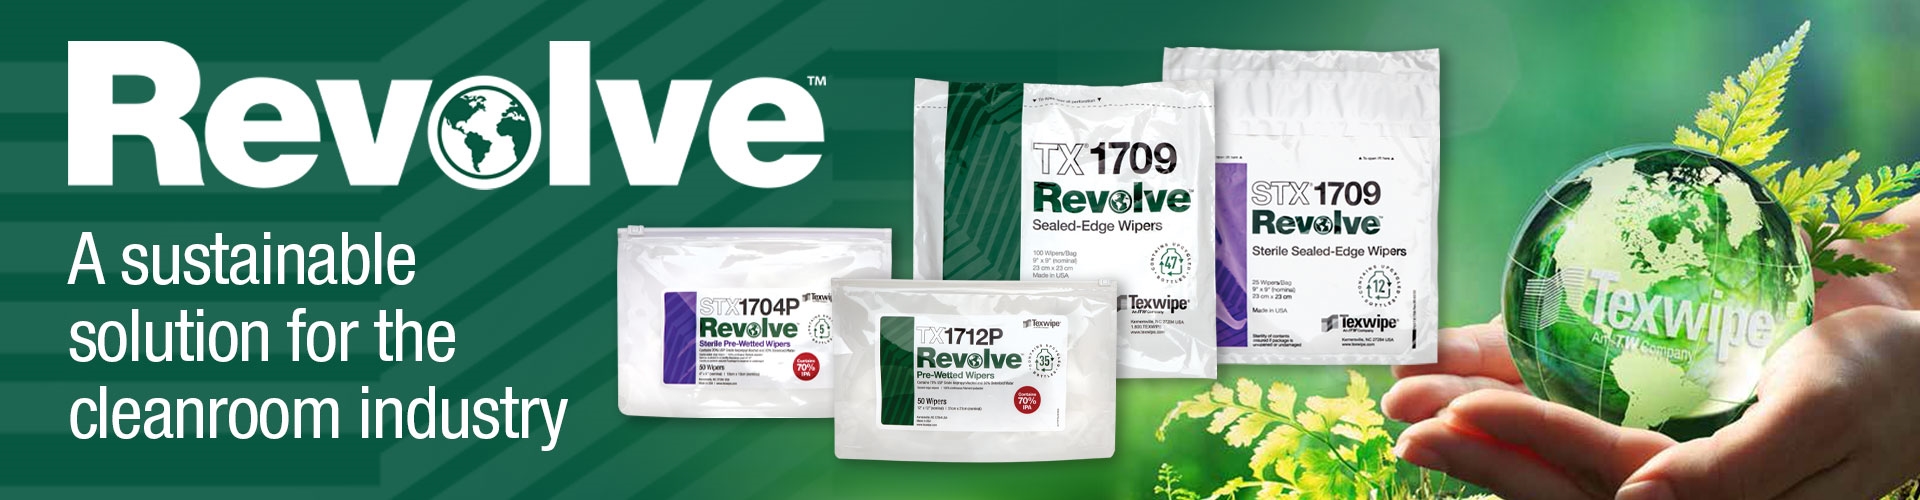 Revolve Sustainable Cleanroom Products